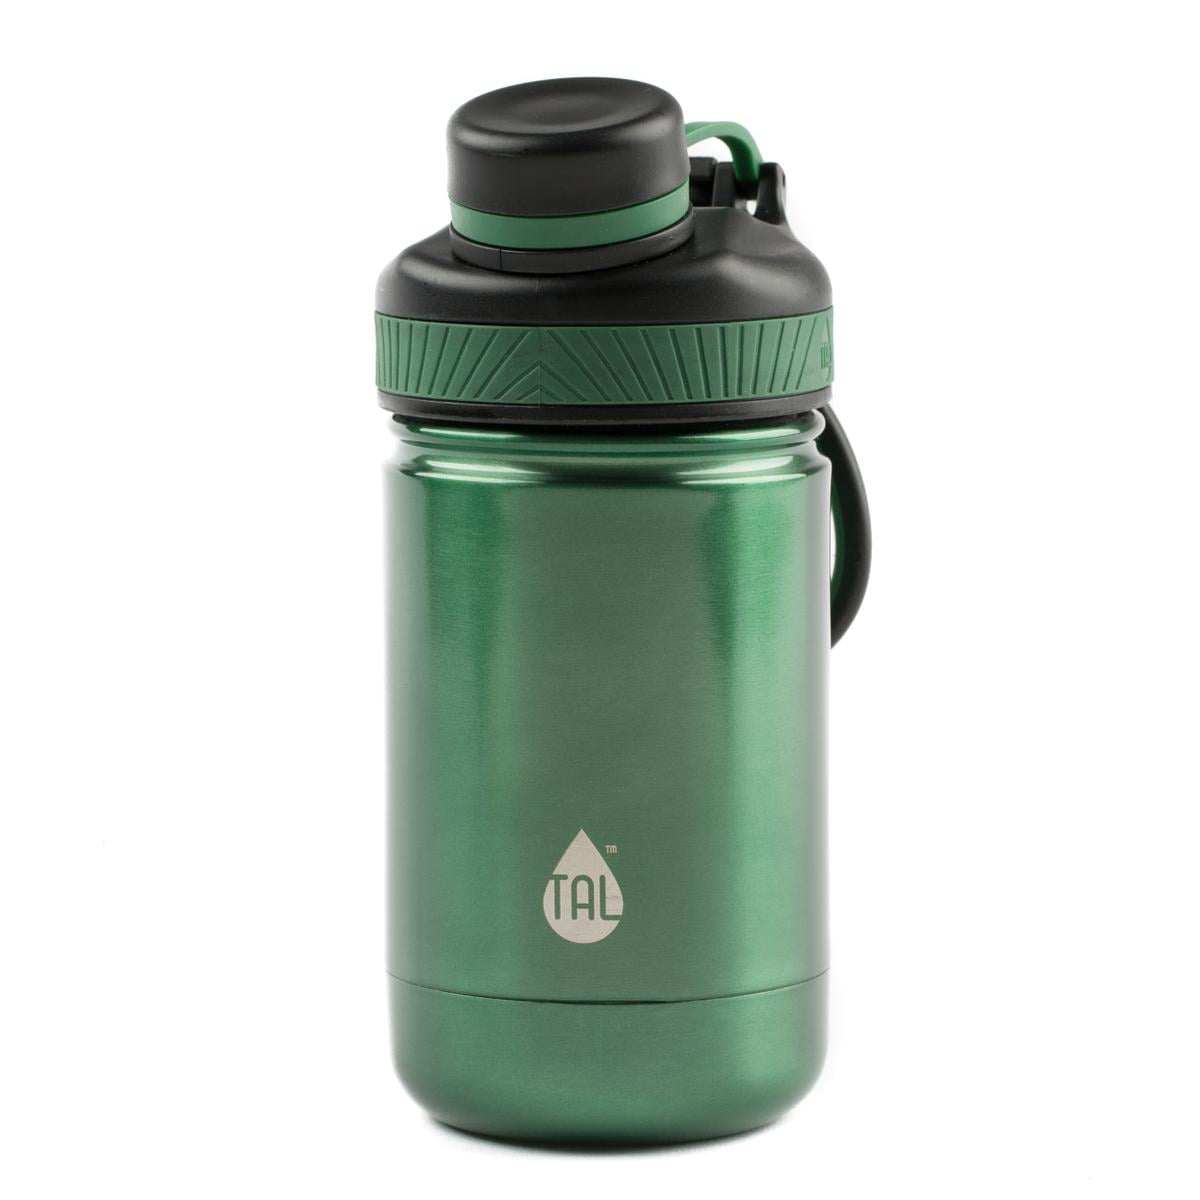 Tal Stainless Steel 12 Ounce Green Double Wall Vacuum Insulated Ranger Tal Water Bottle Stainless Steel